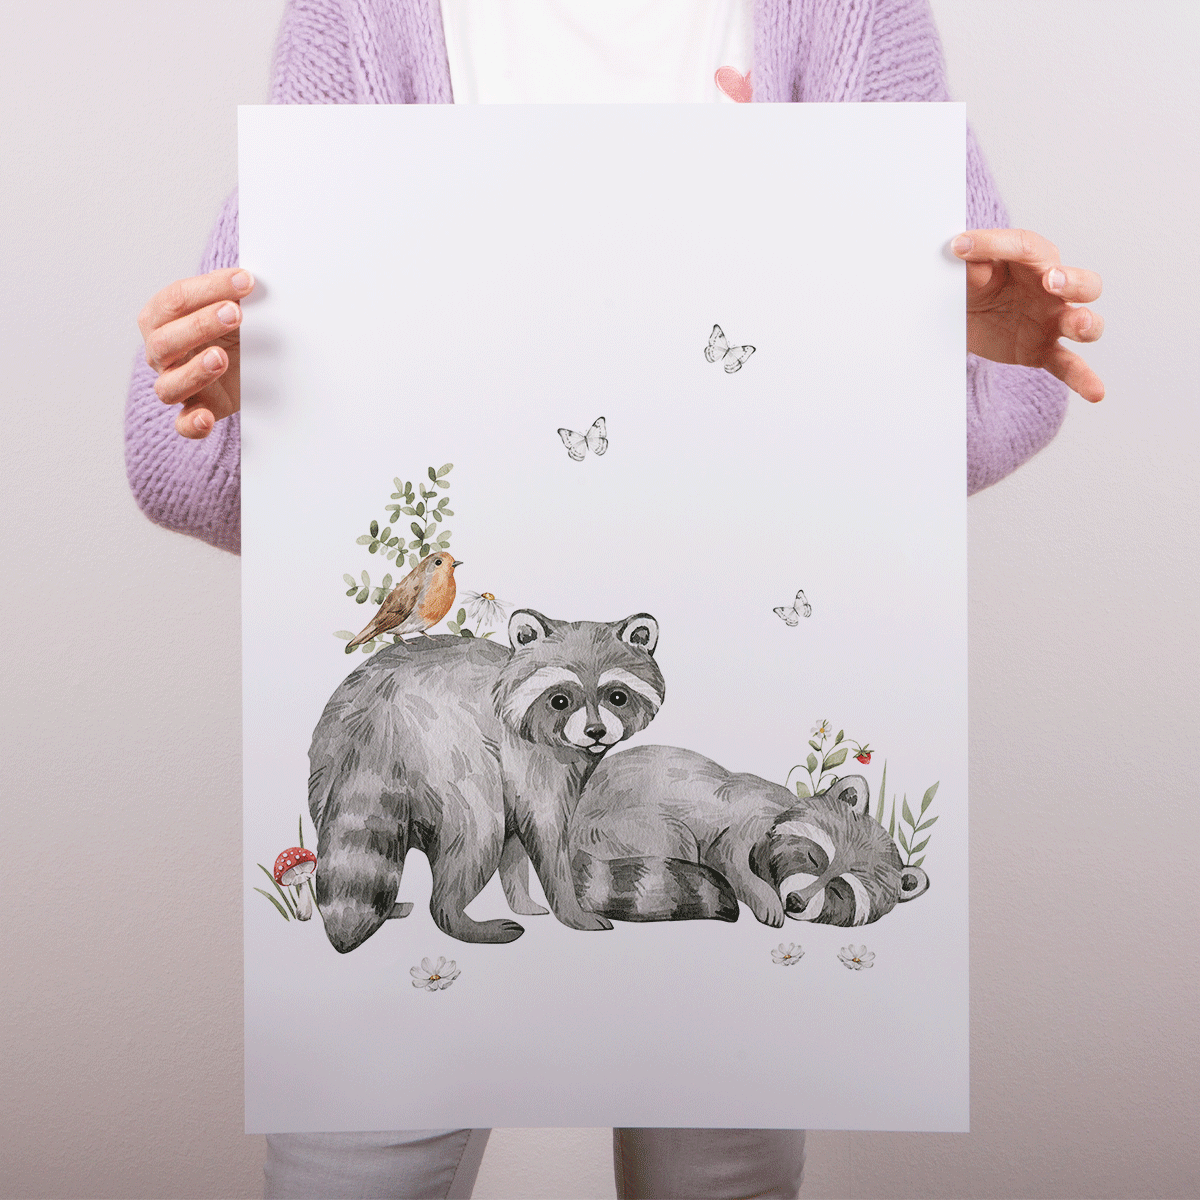 Woodland print - Magical forest - Racoons